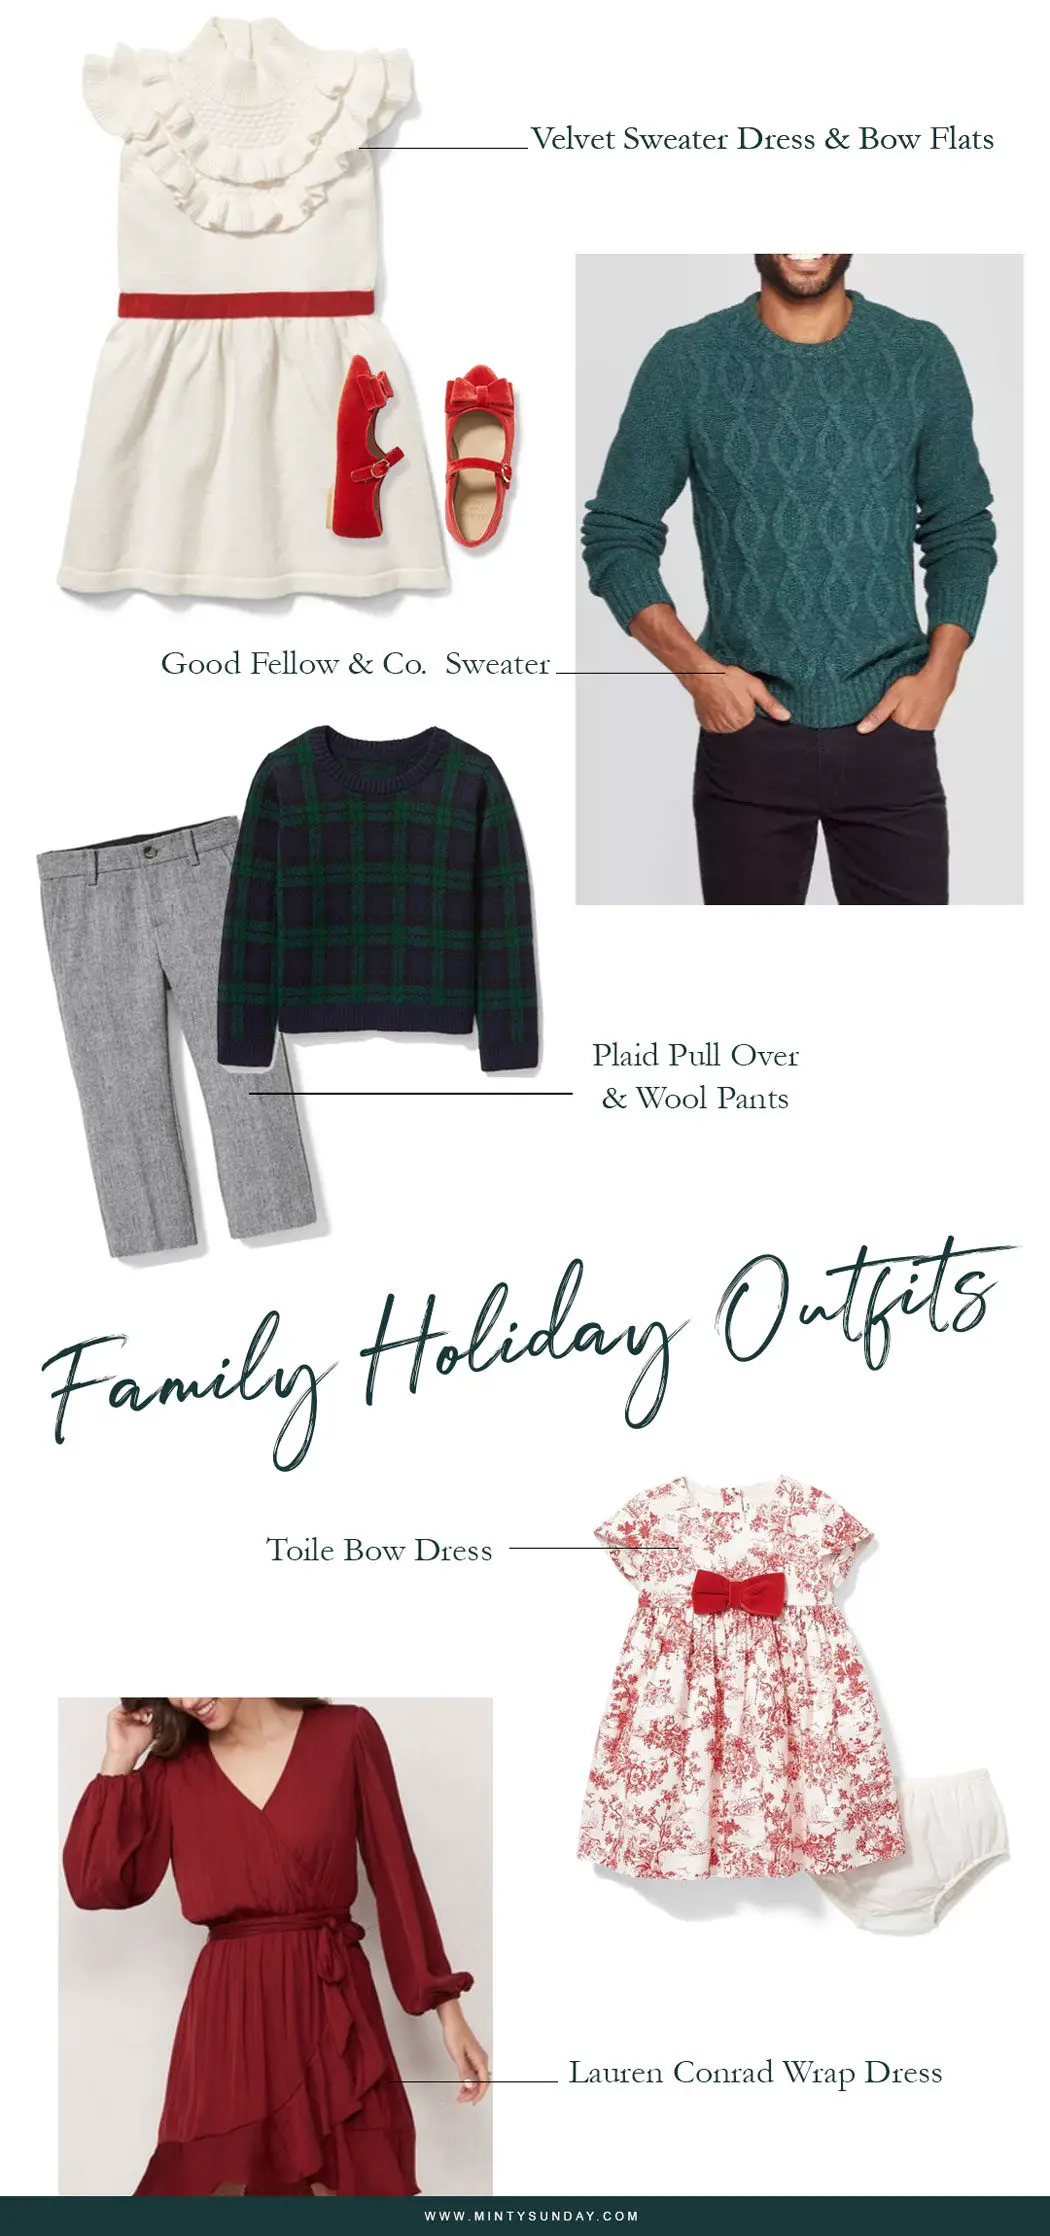 Coordinating Family Outfits for the holidays - How to easily create a coordinated family outfits for photos planned or spontaneous! (mintysunday.com) #mommyandme #familyoutfits #holidayphotos